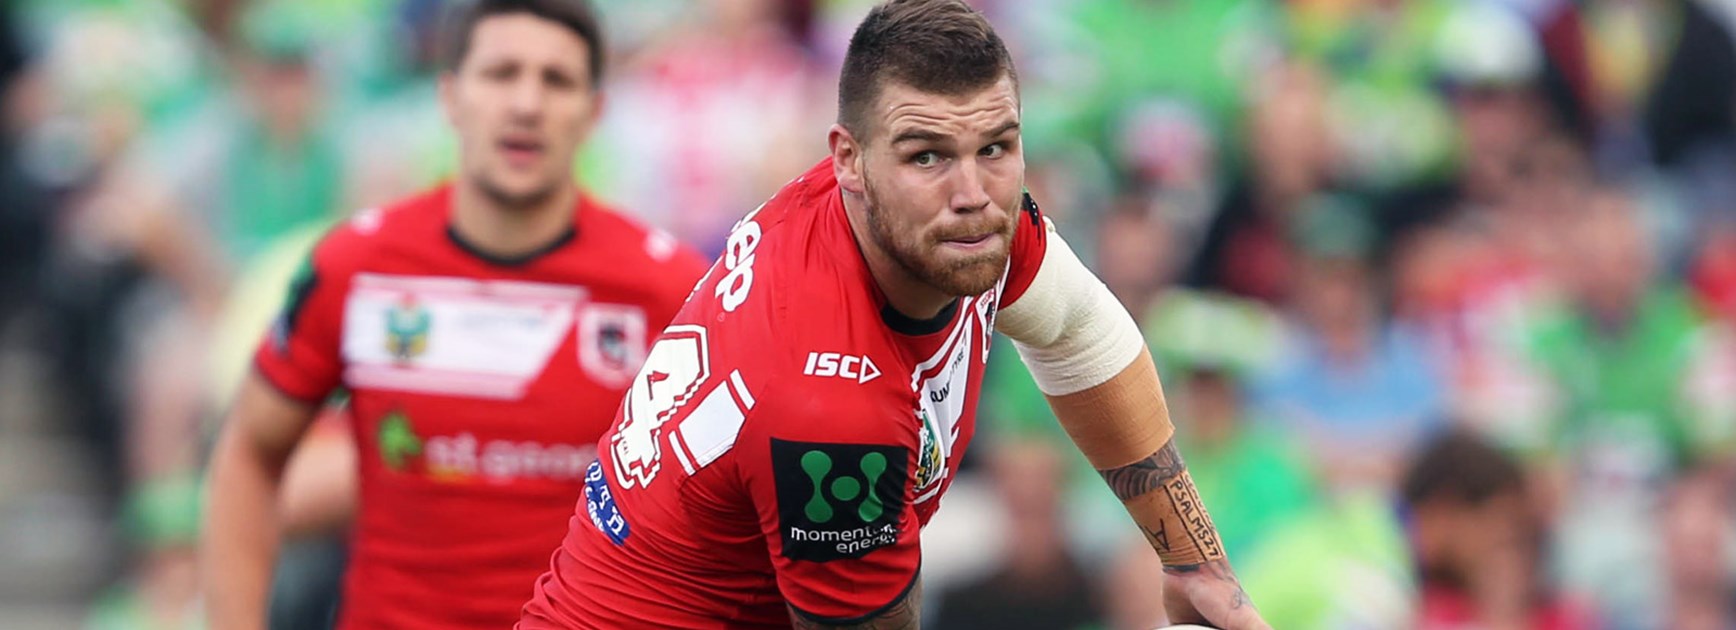 Josh Dugan has indicated he'd prefer a move to the centres in 2016.